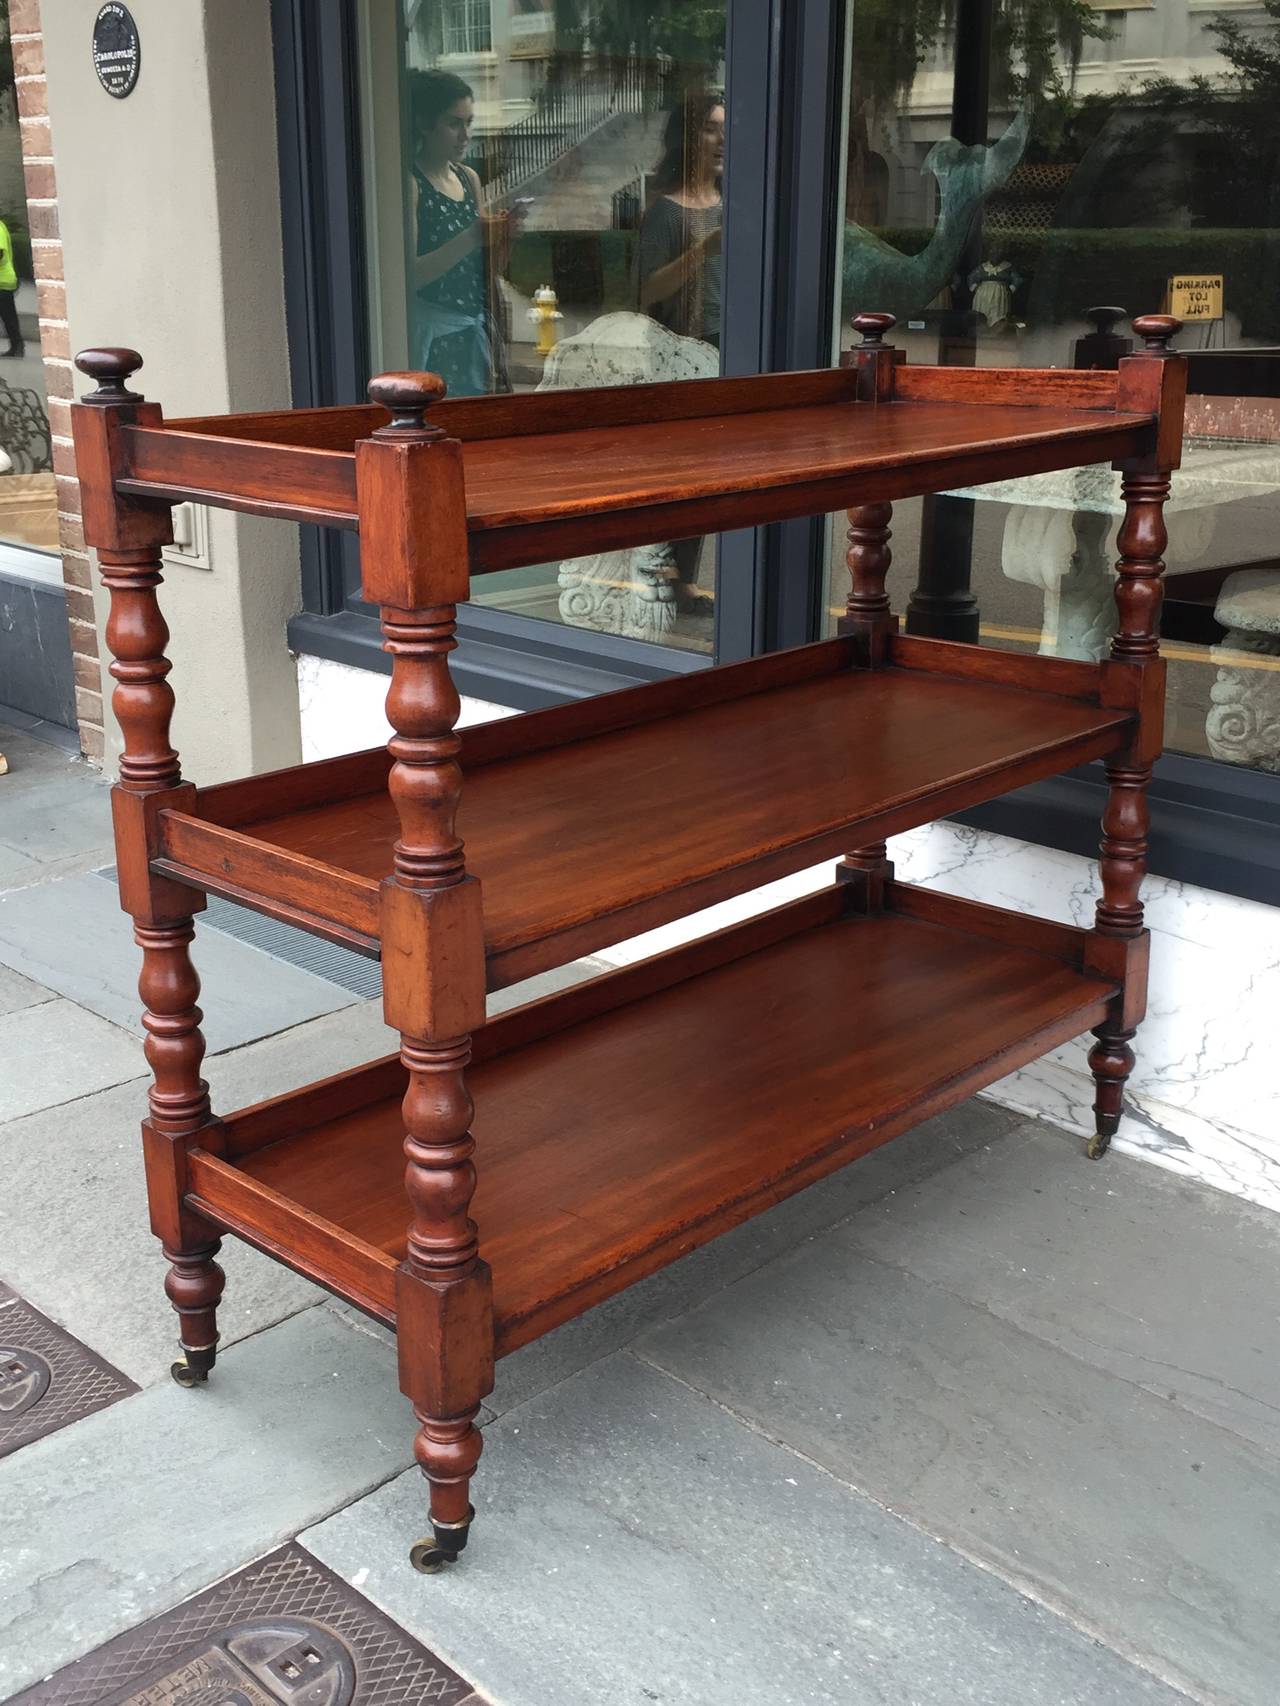 English mahogany three tier trolley on brass casters.  Turned columns support three shelves with back and side rails on each shelf